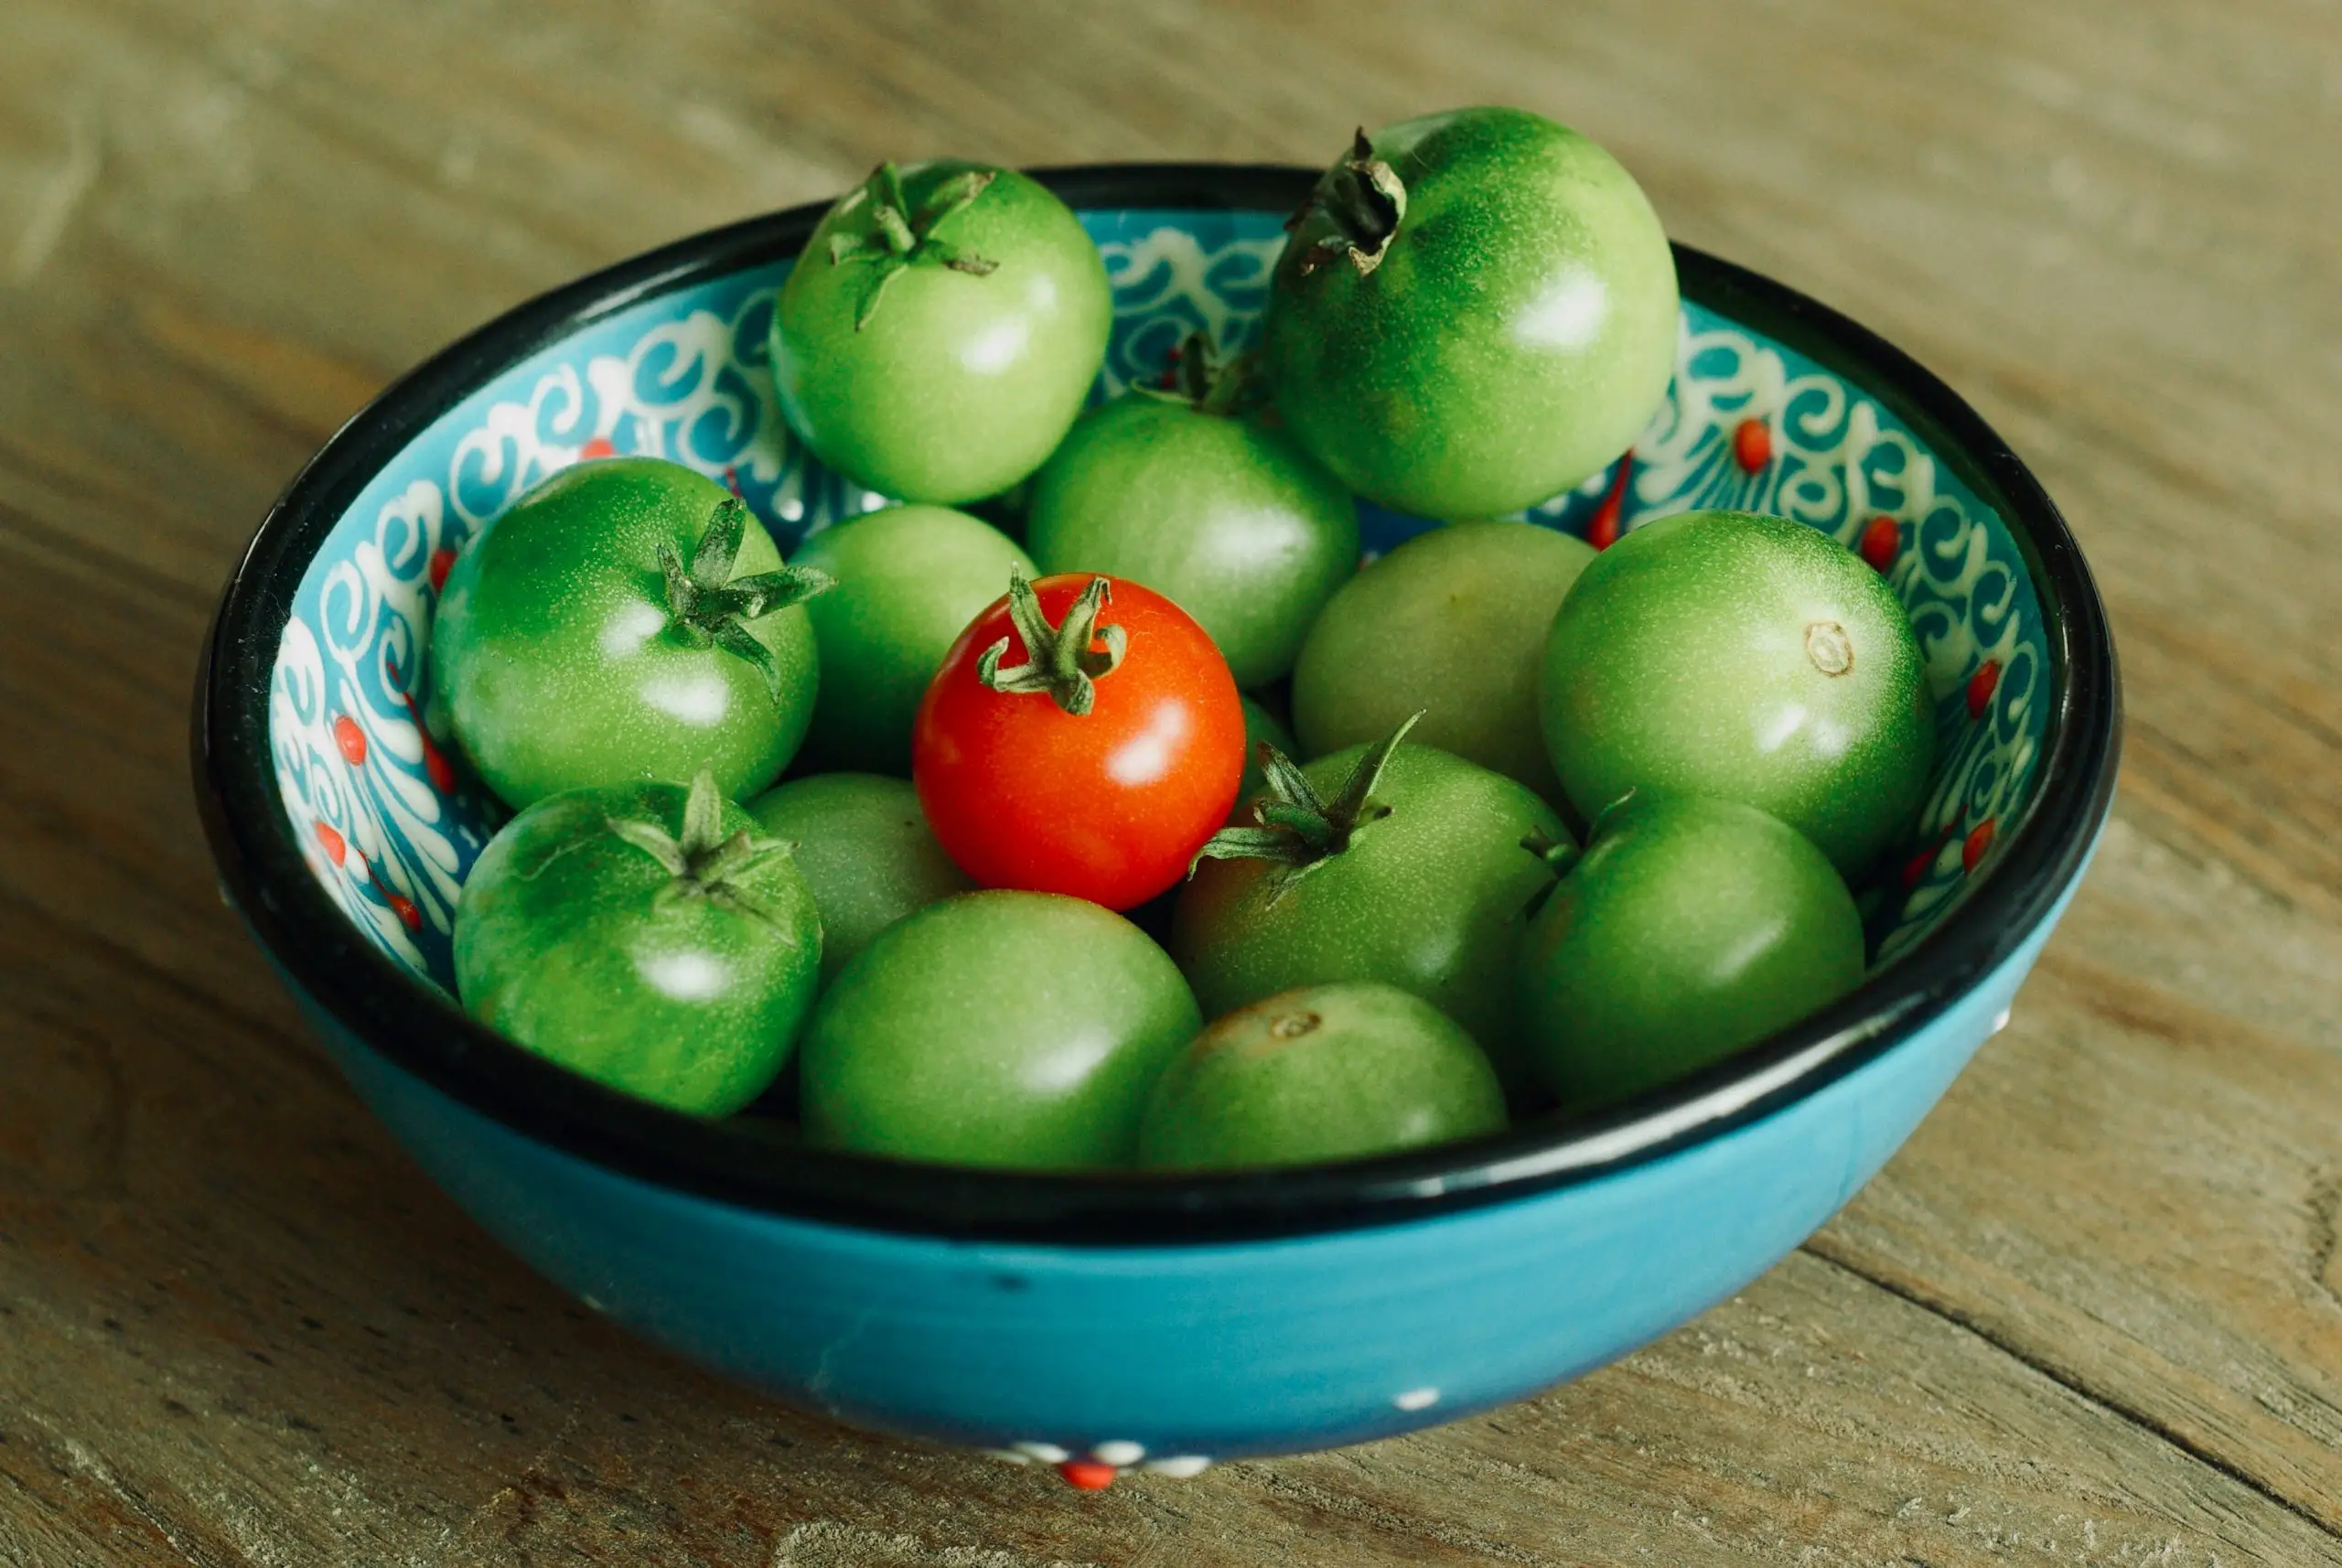 Techniques to Ripen Your Green Tomatoes Indoors